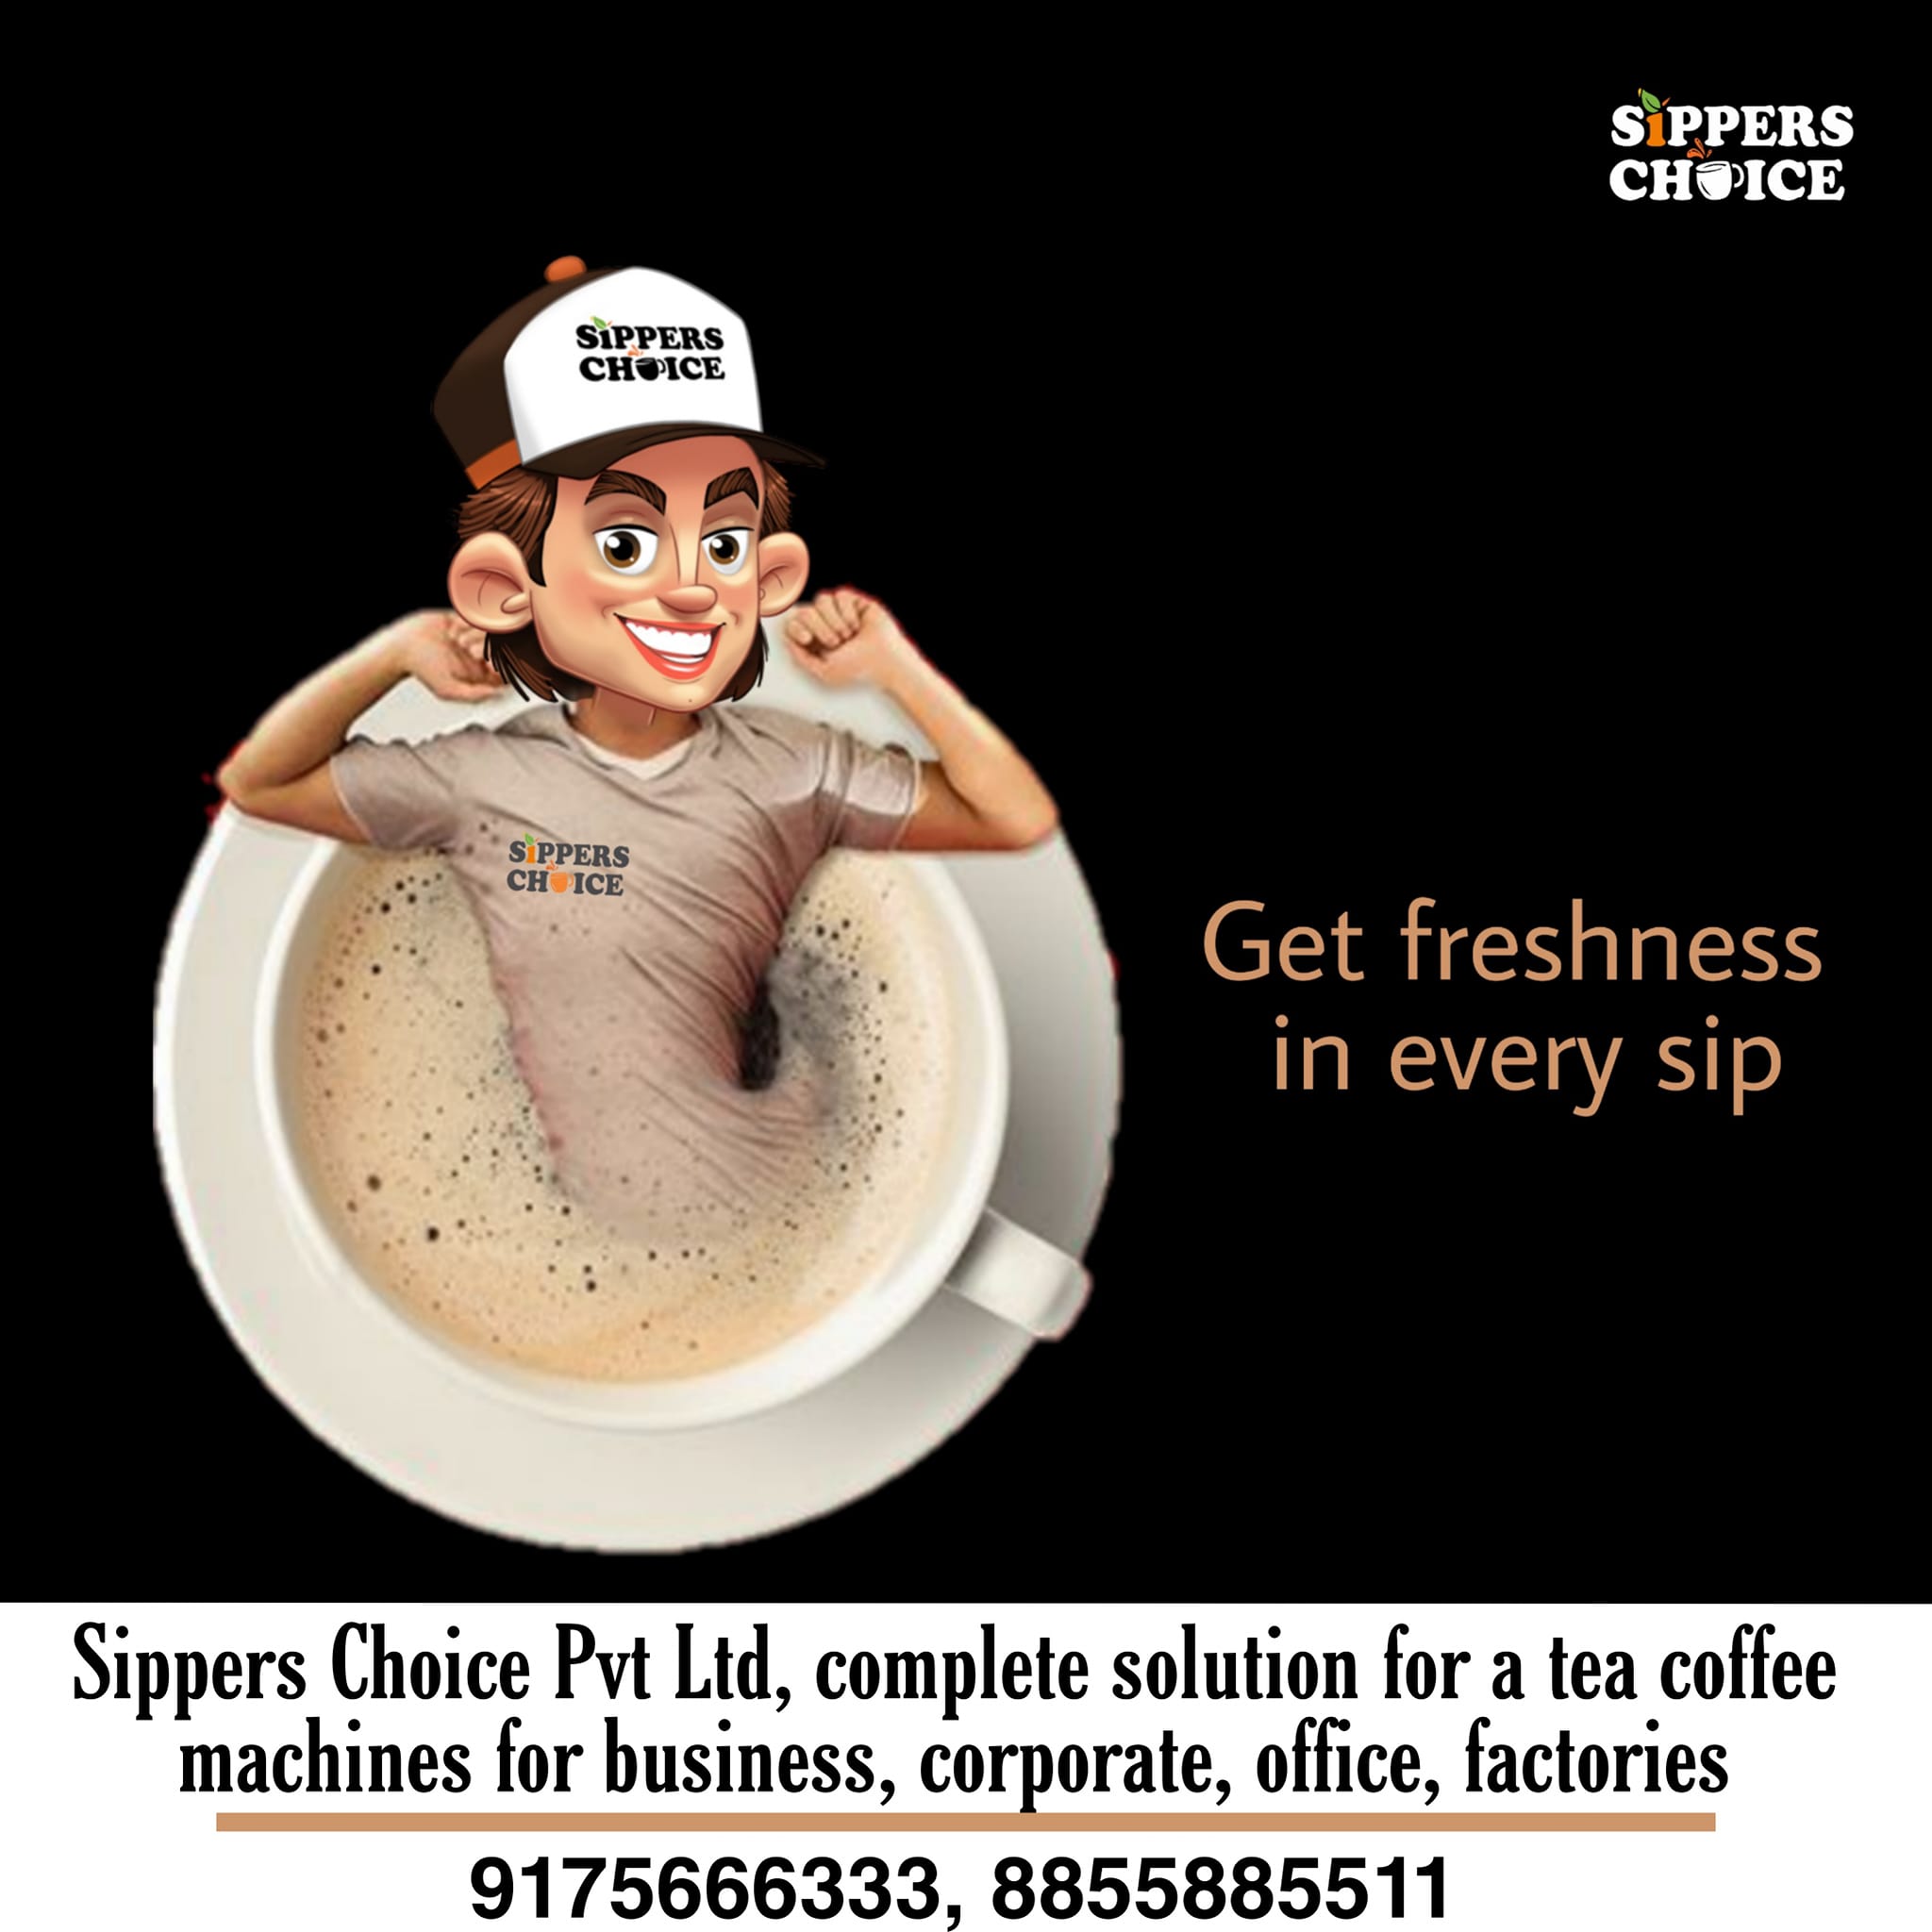 Sippers Choice Pvt ltd specialty hot beverages lifestyle brand in India. 